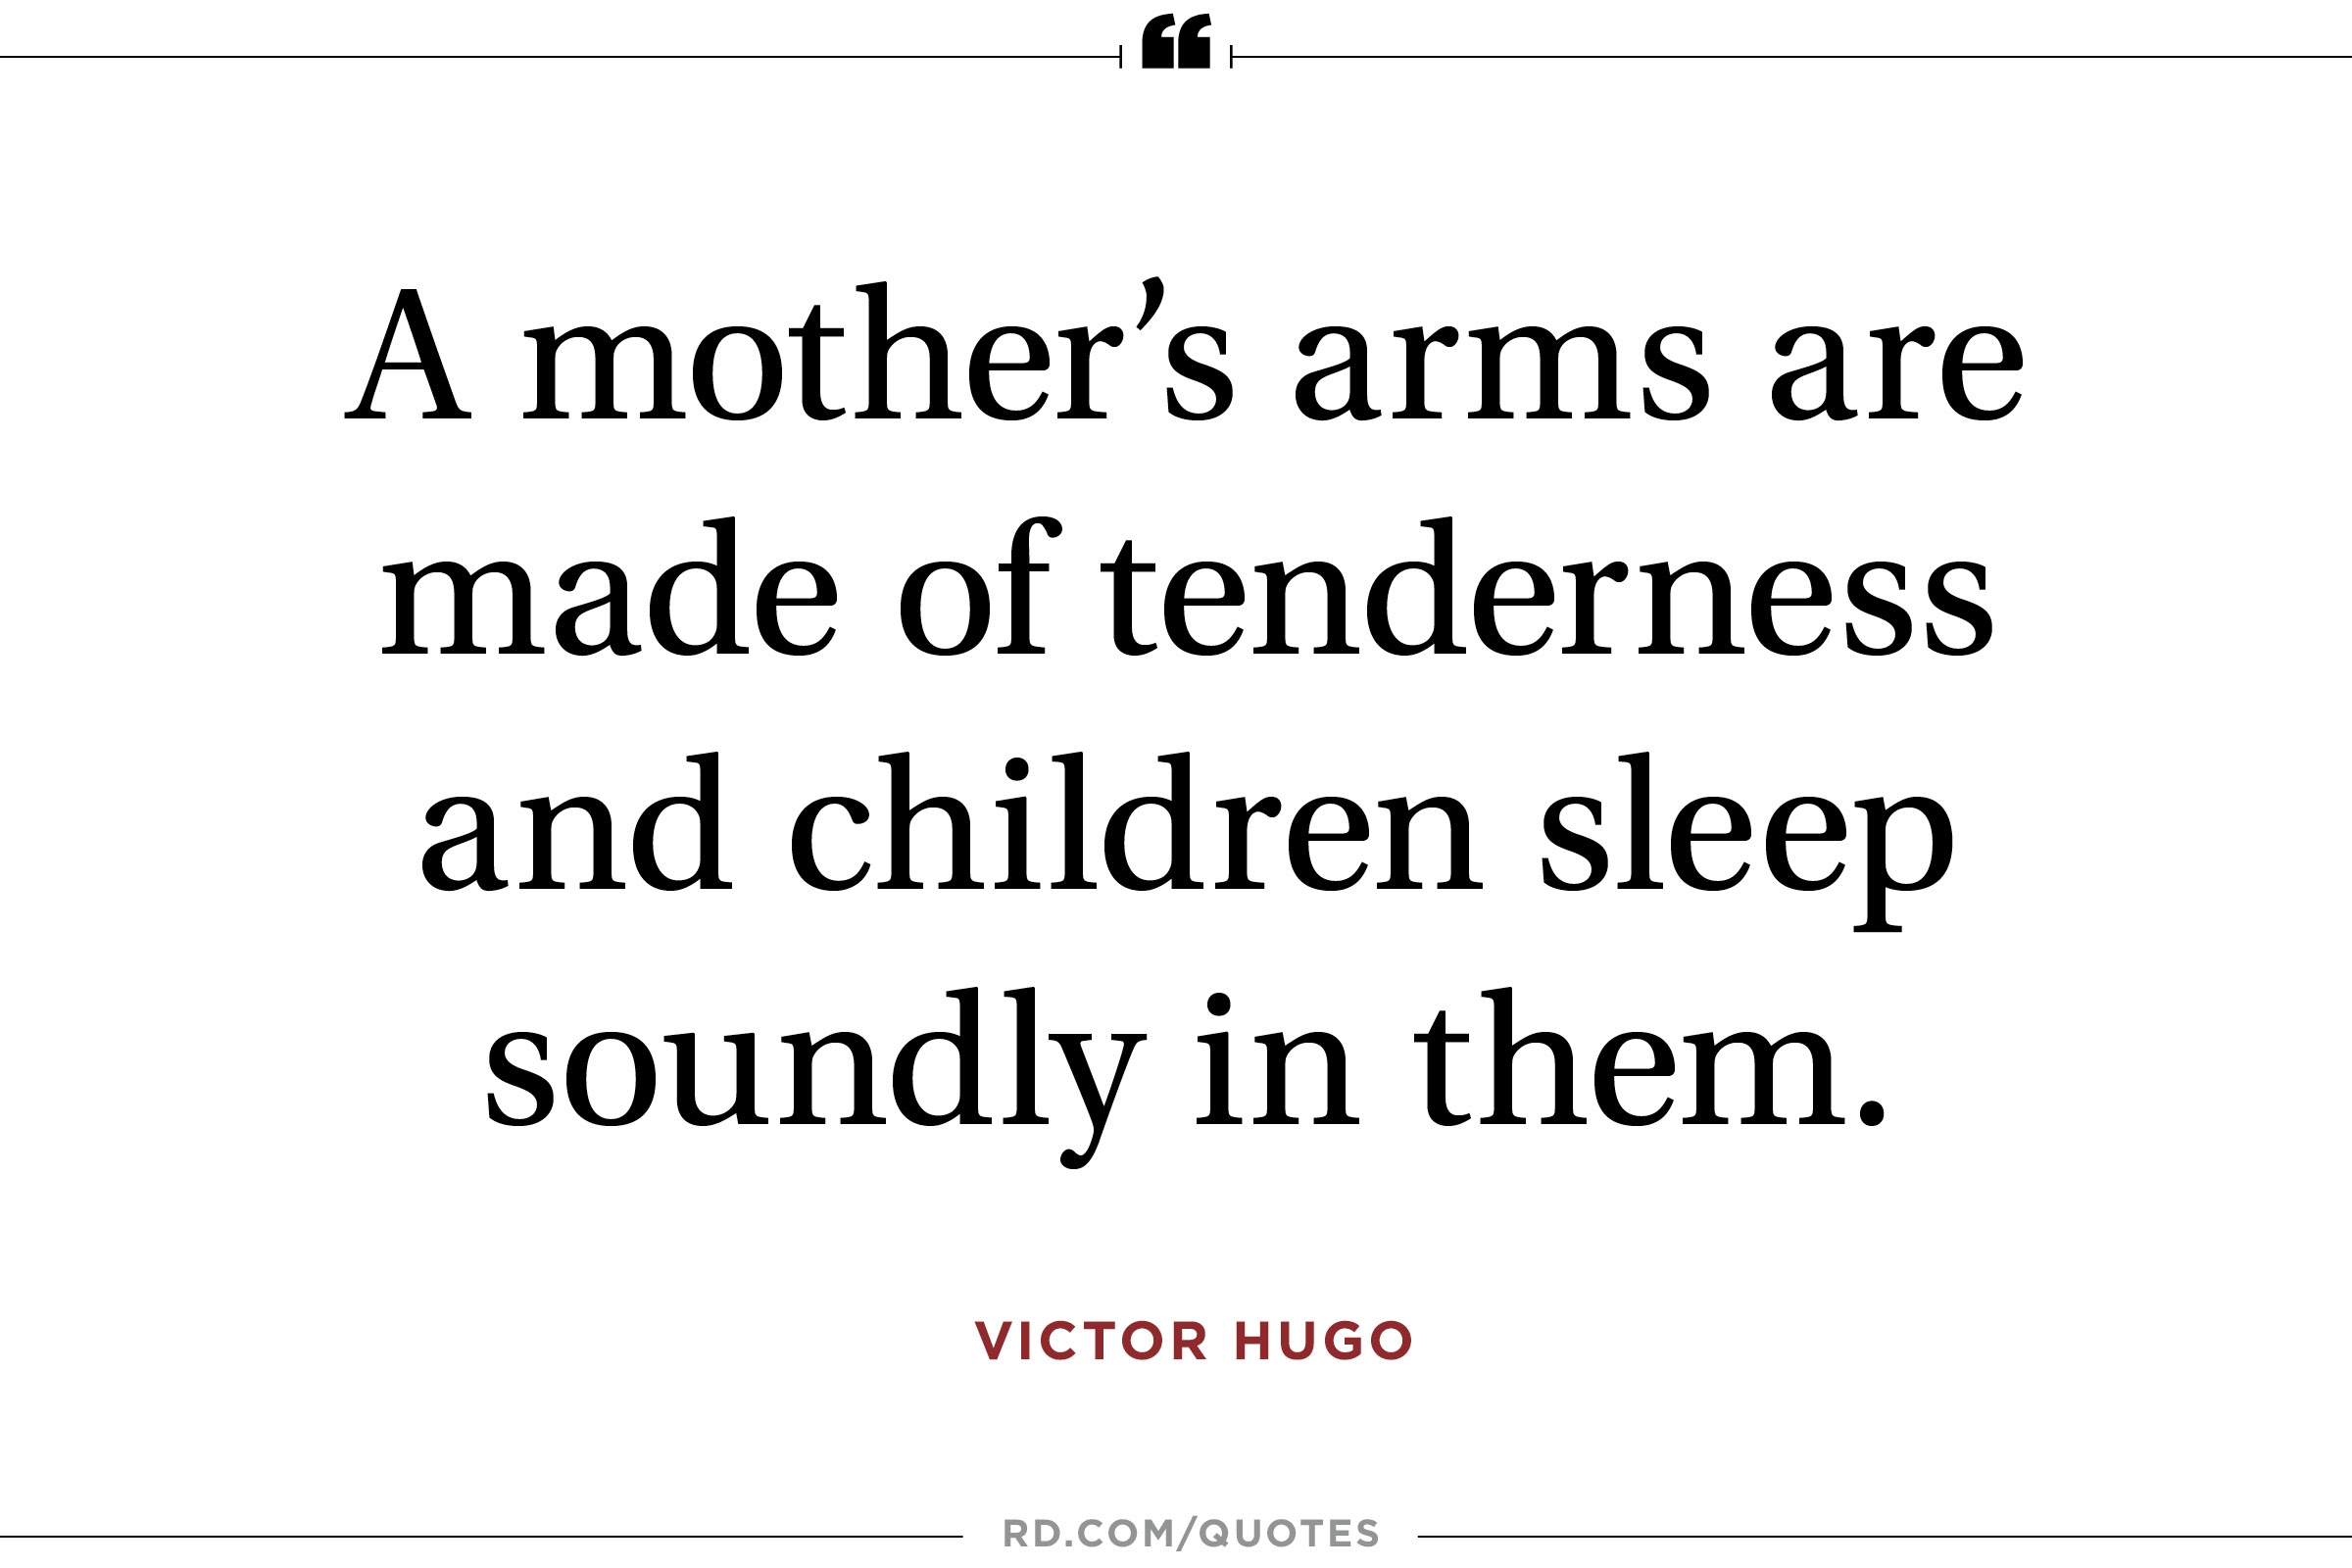 A mother's arms are made of tenderness and children sleep soundly in them. Victor Hugo